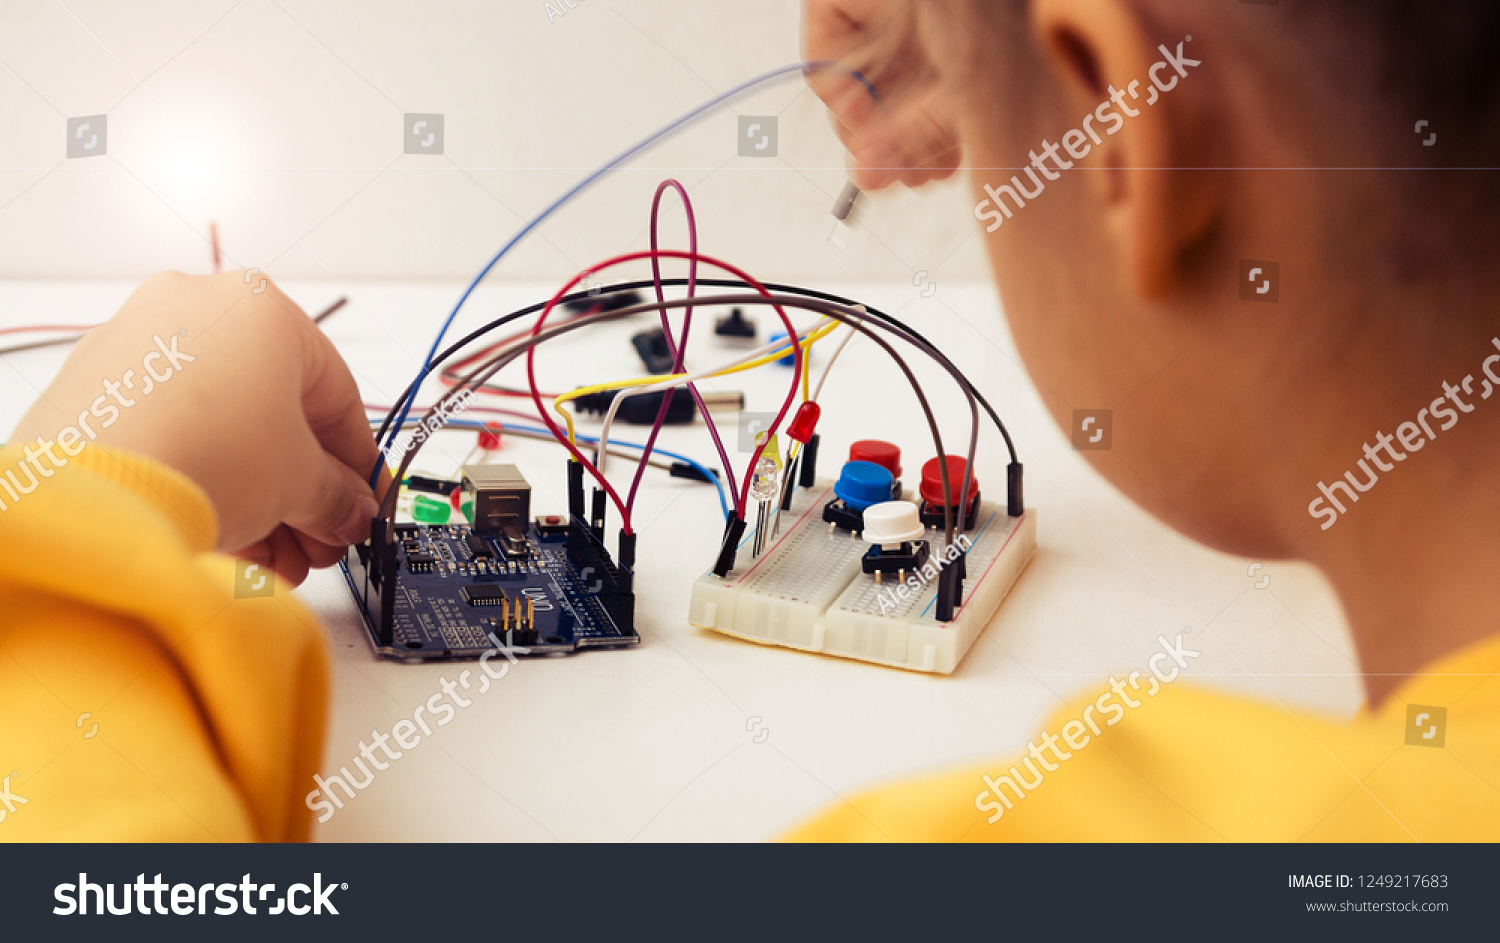 A cute girl constructs robot arduino and program it. The boards and microcontrollers are on the table. STEM education inscription. Programming. Mathematics. The science. Technologie. DIY.  #1249217683